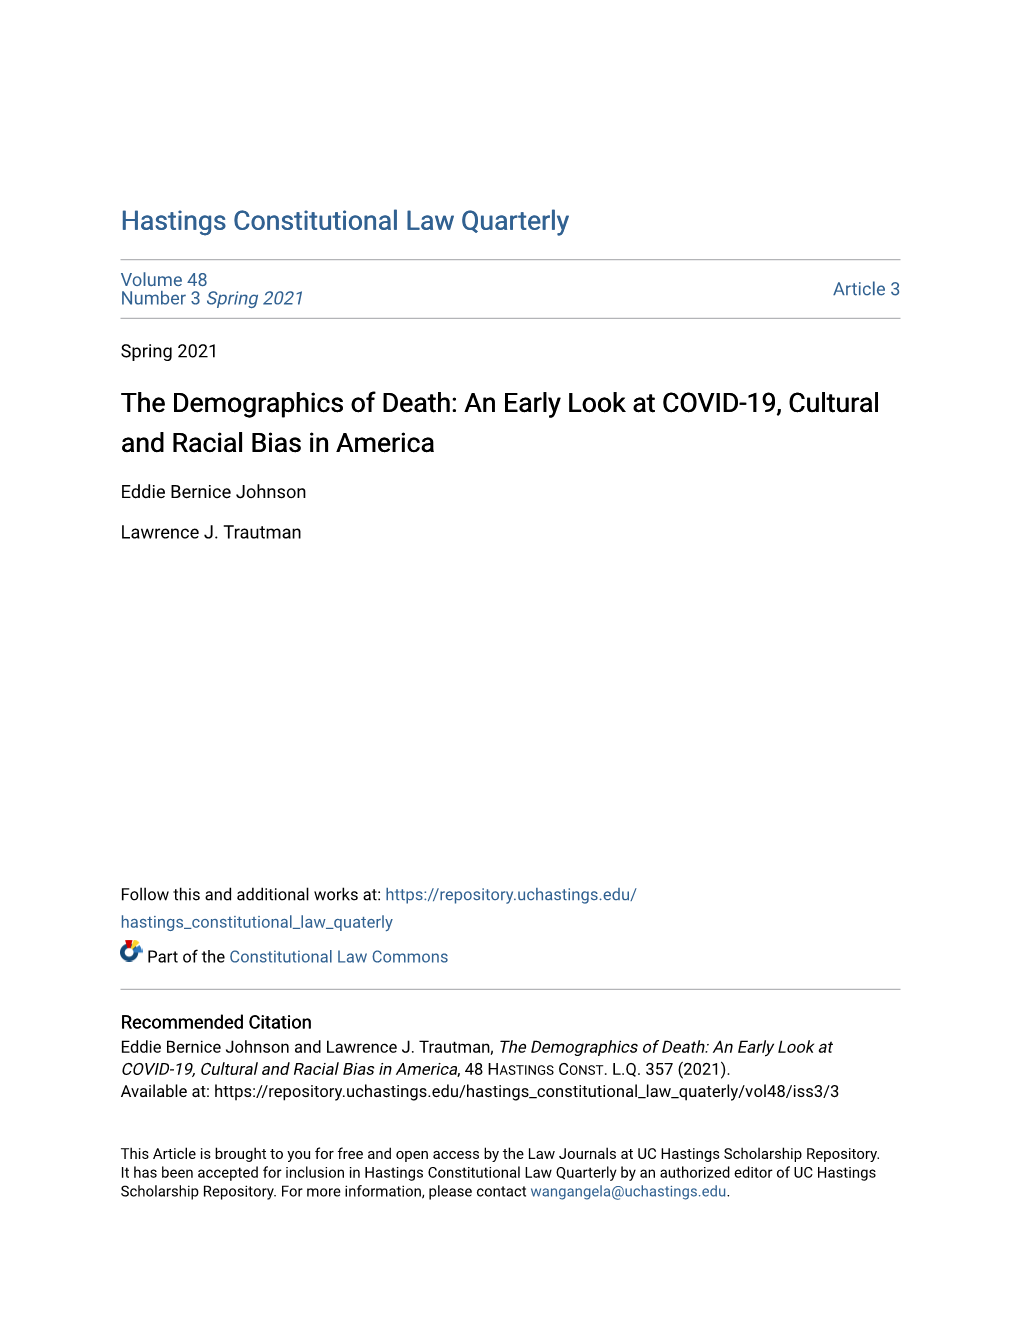 An Early Look at COVID-19, Cultural and Racial Bias in America